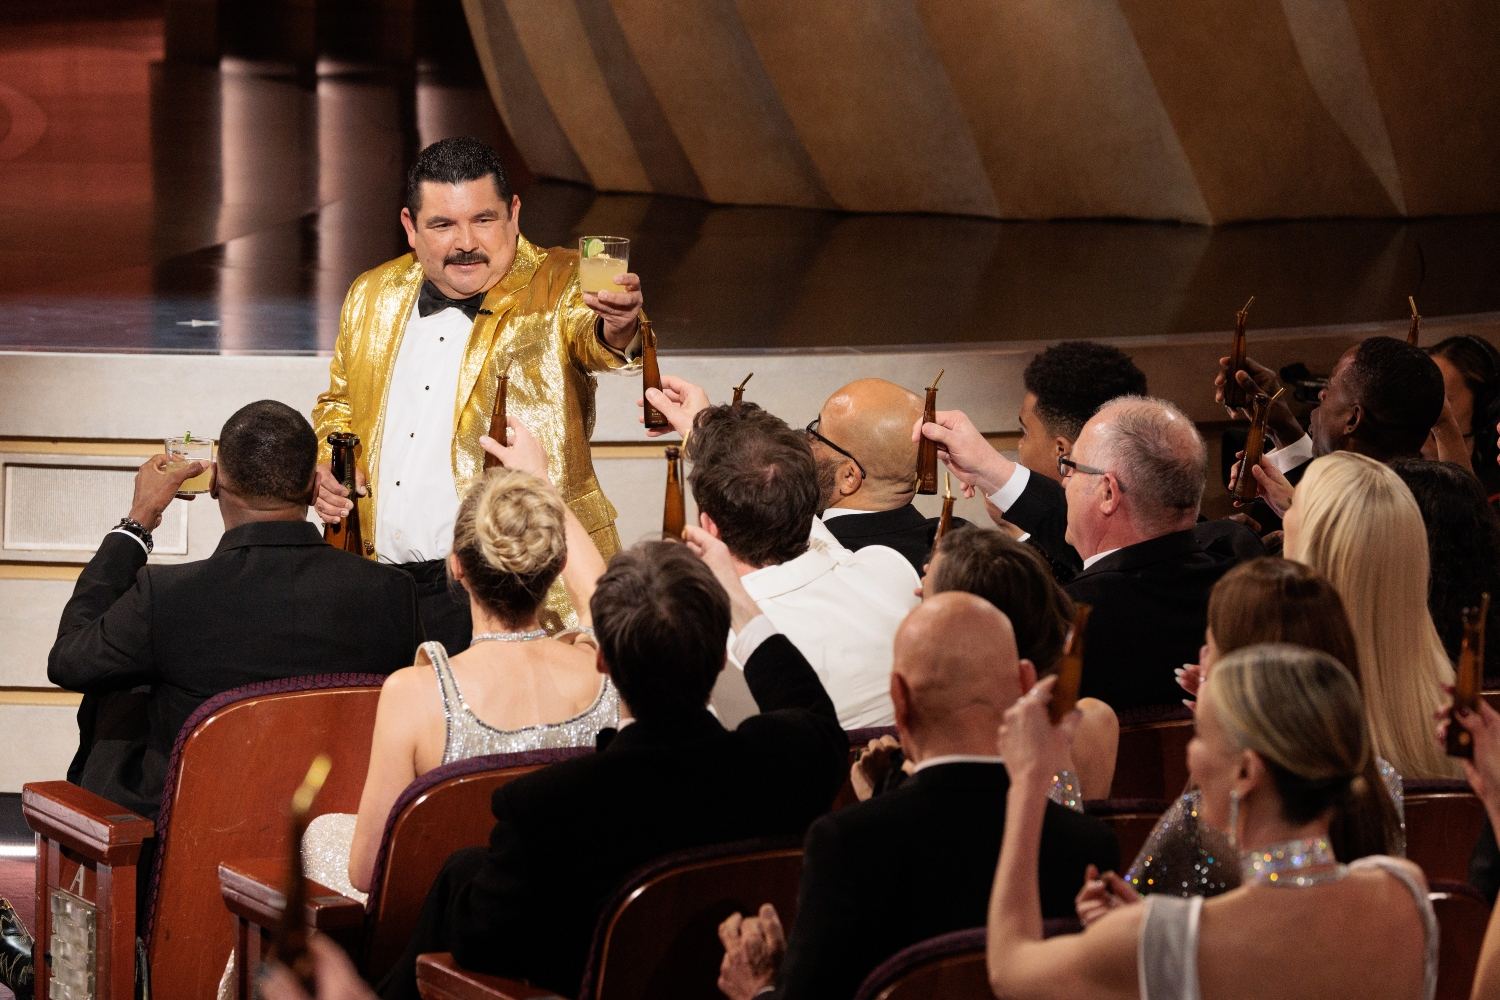 Guillermo offers Don Julio margaritas to the Oscars audience